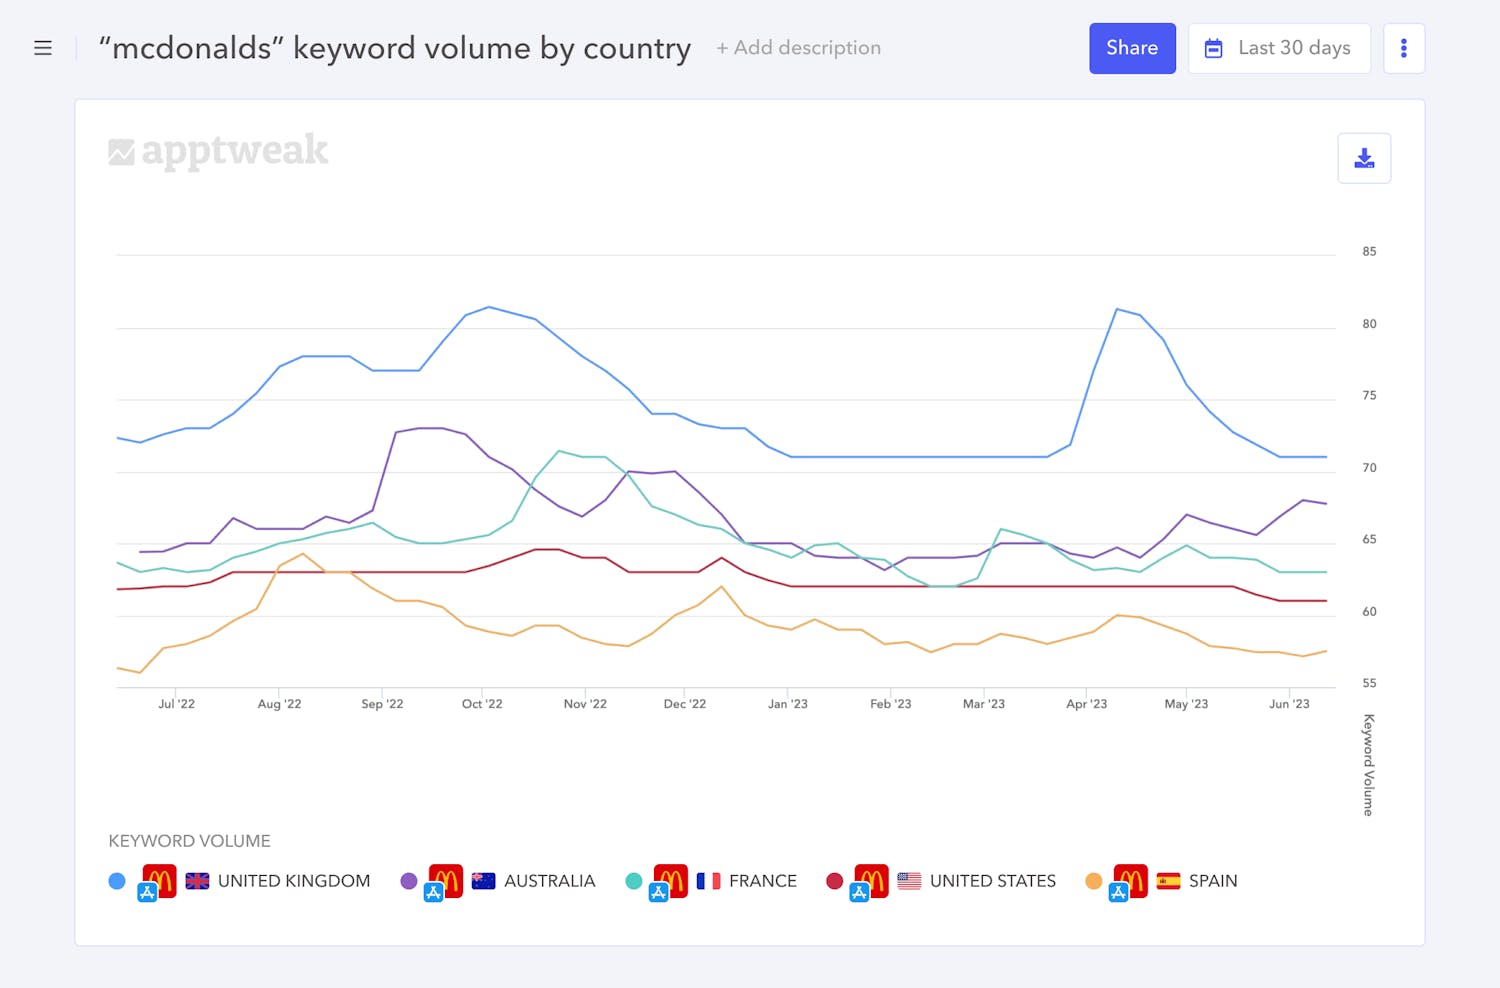 With Reporting Studio, easily monitor keyword volumes across countries.